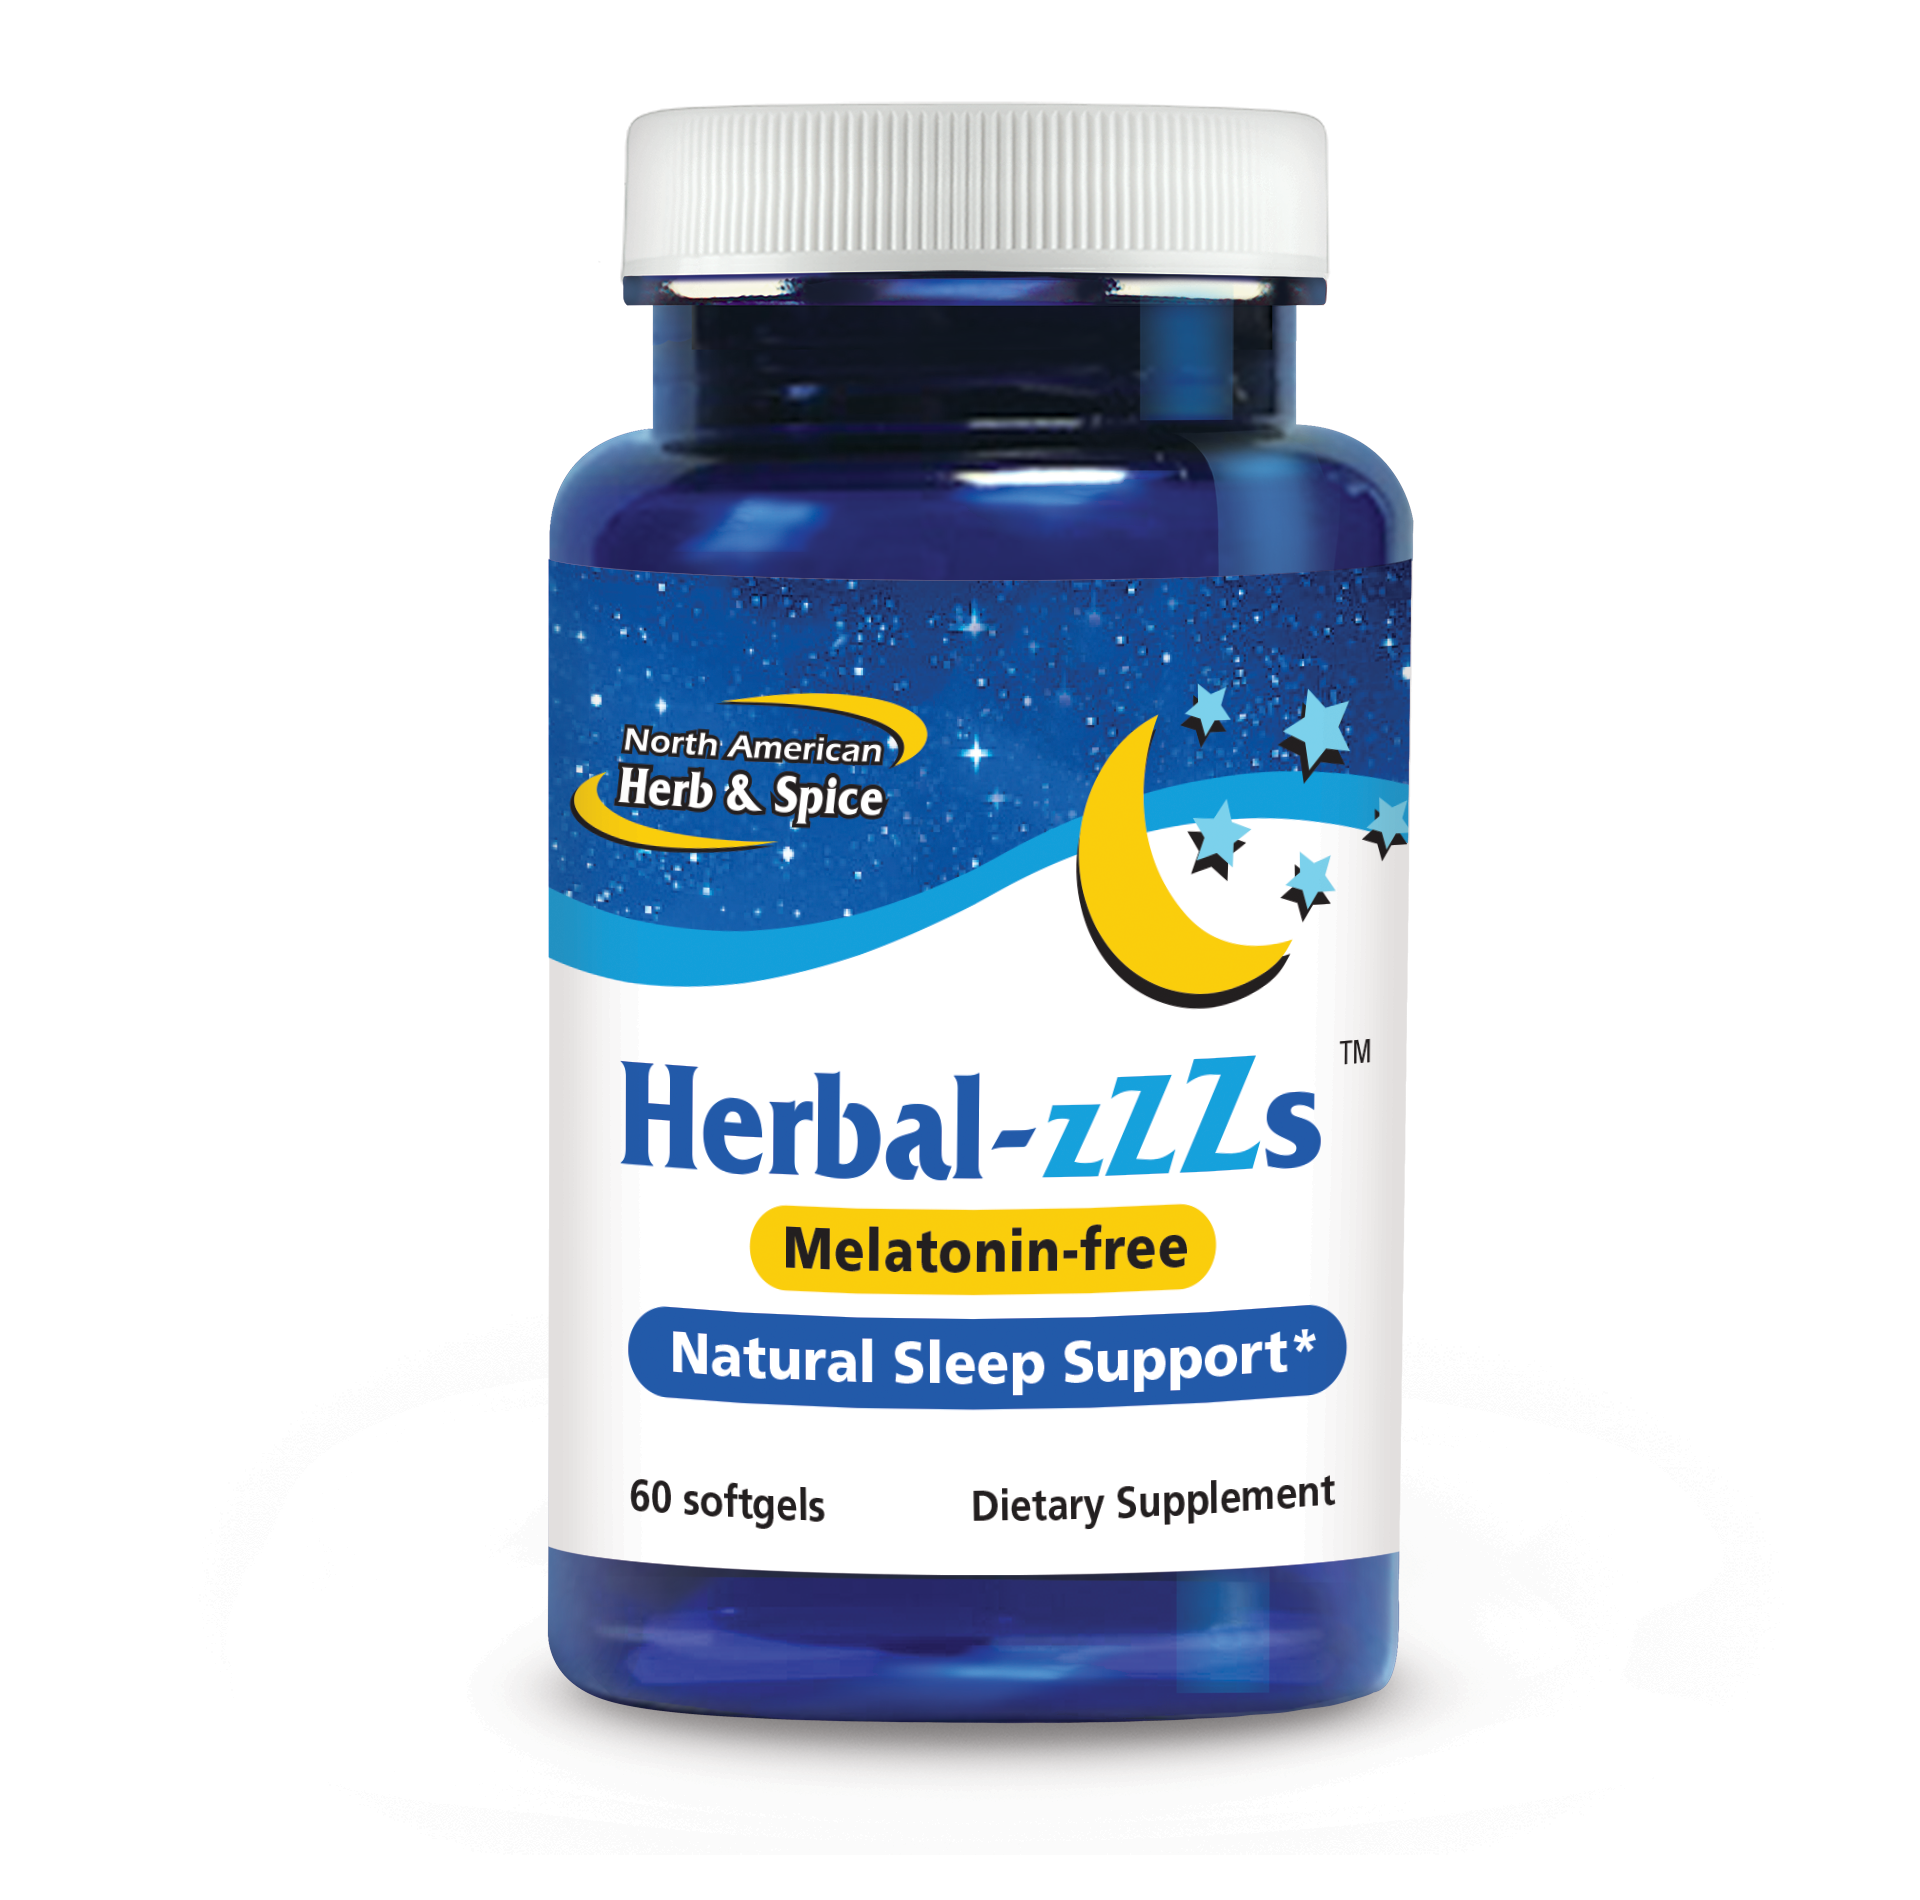 Featured image for “Herbal-zzZs”